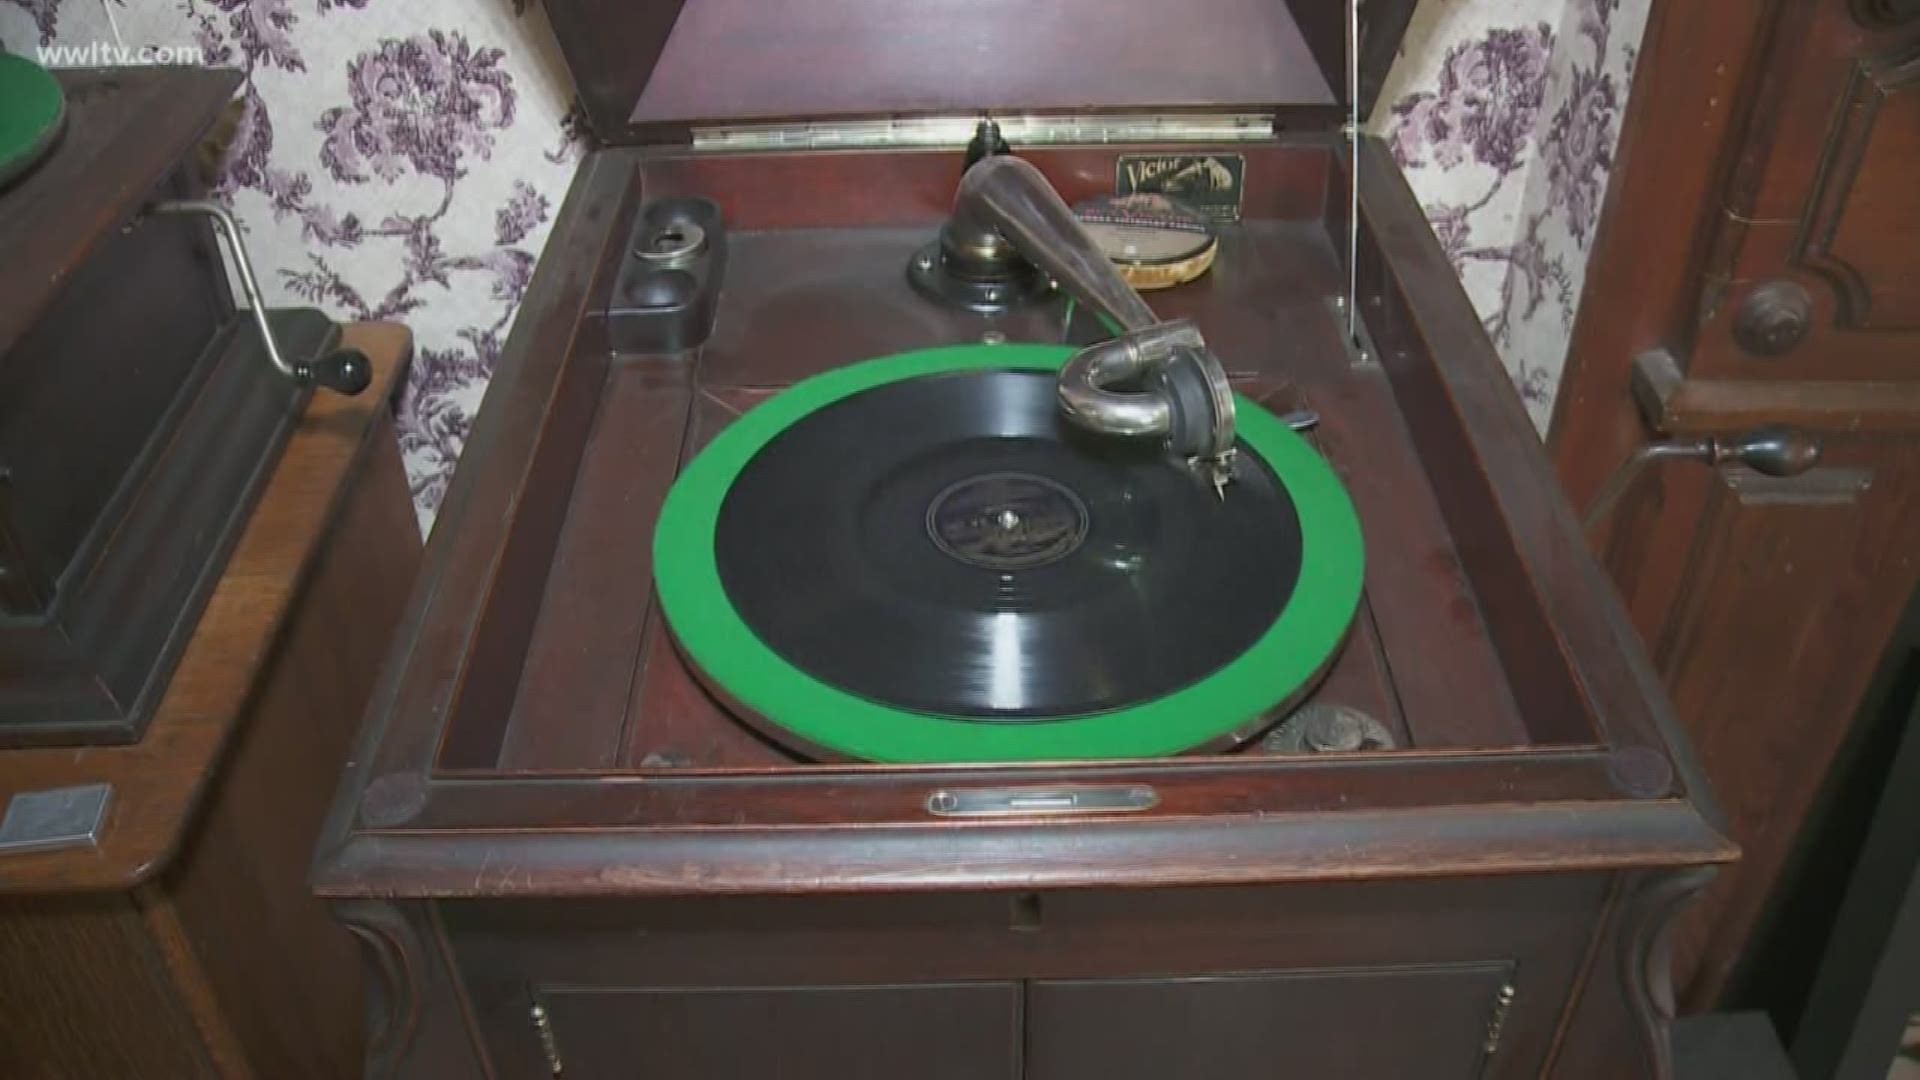 "This music playing device that was made before the US entered World War I is still perfectly functional (Music) with a minimum amount of maintenance," John McCusker said.